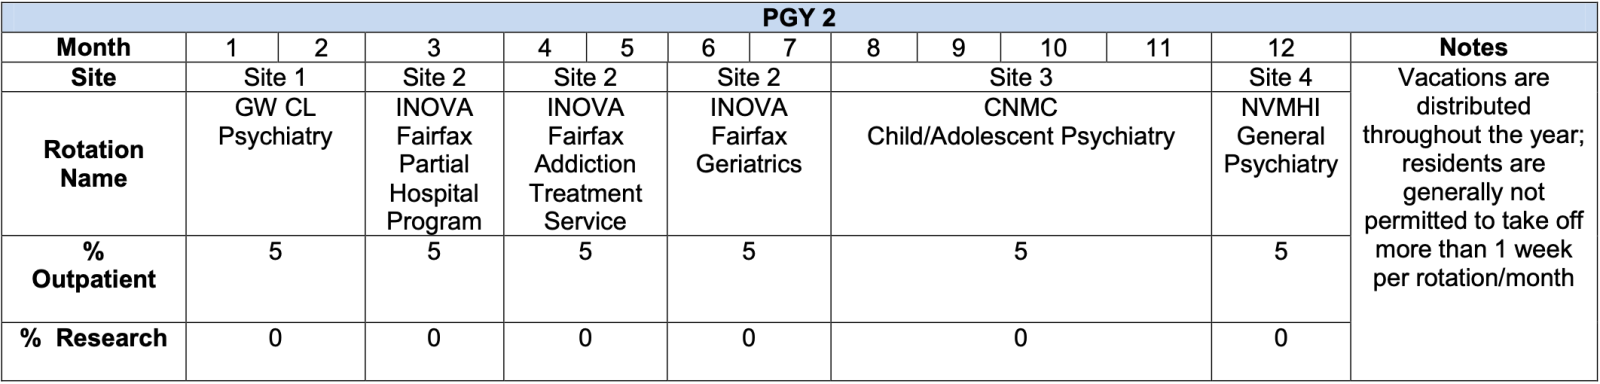 PGY2 schedule